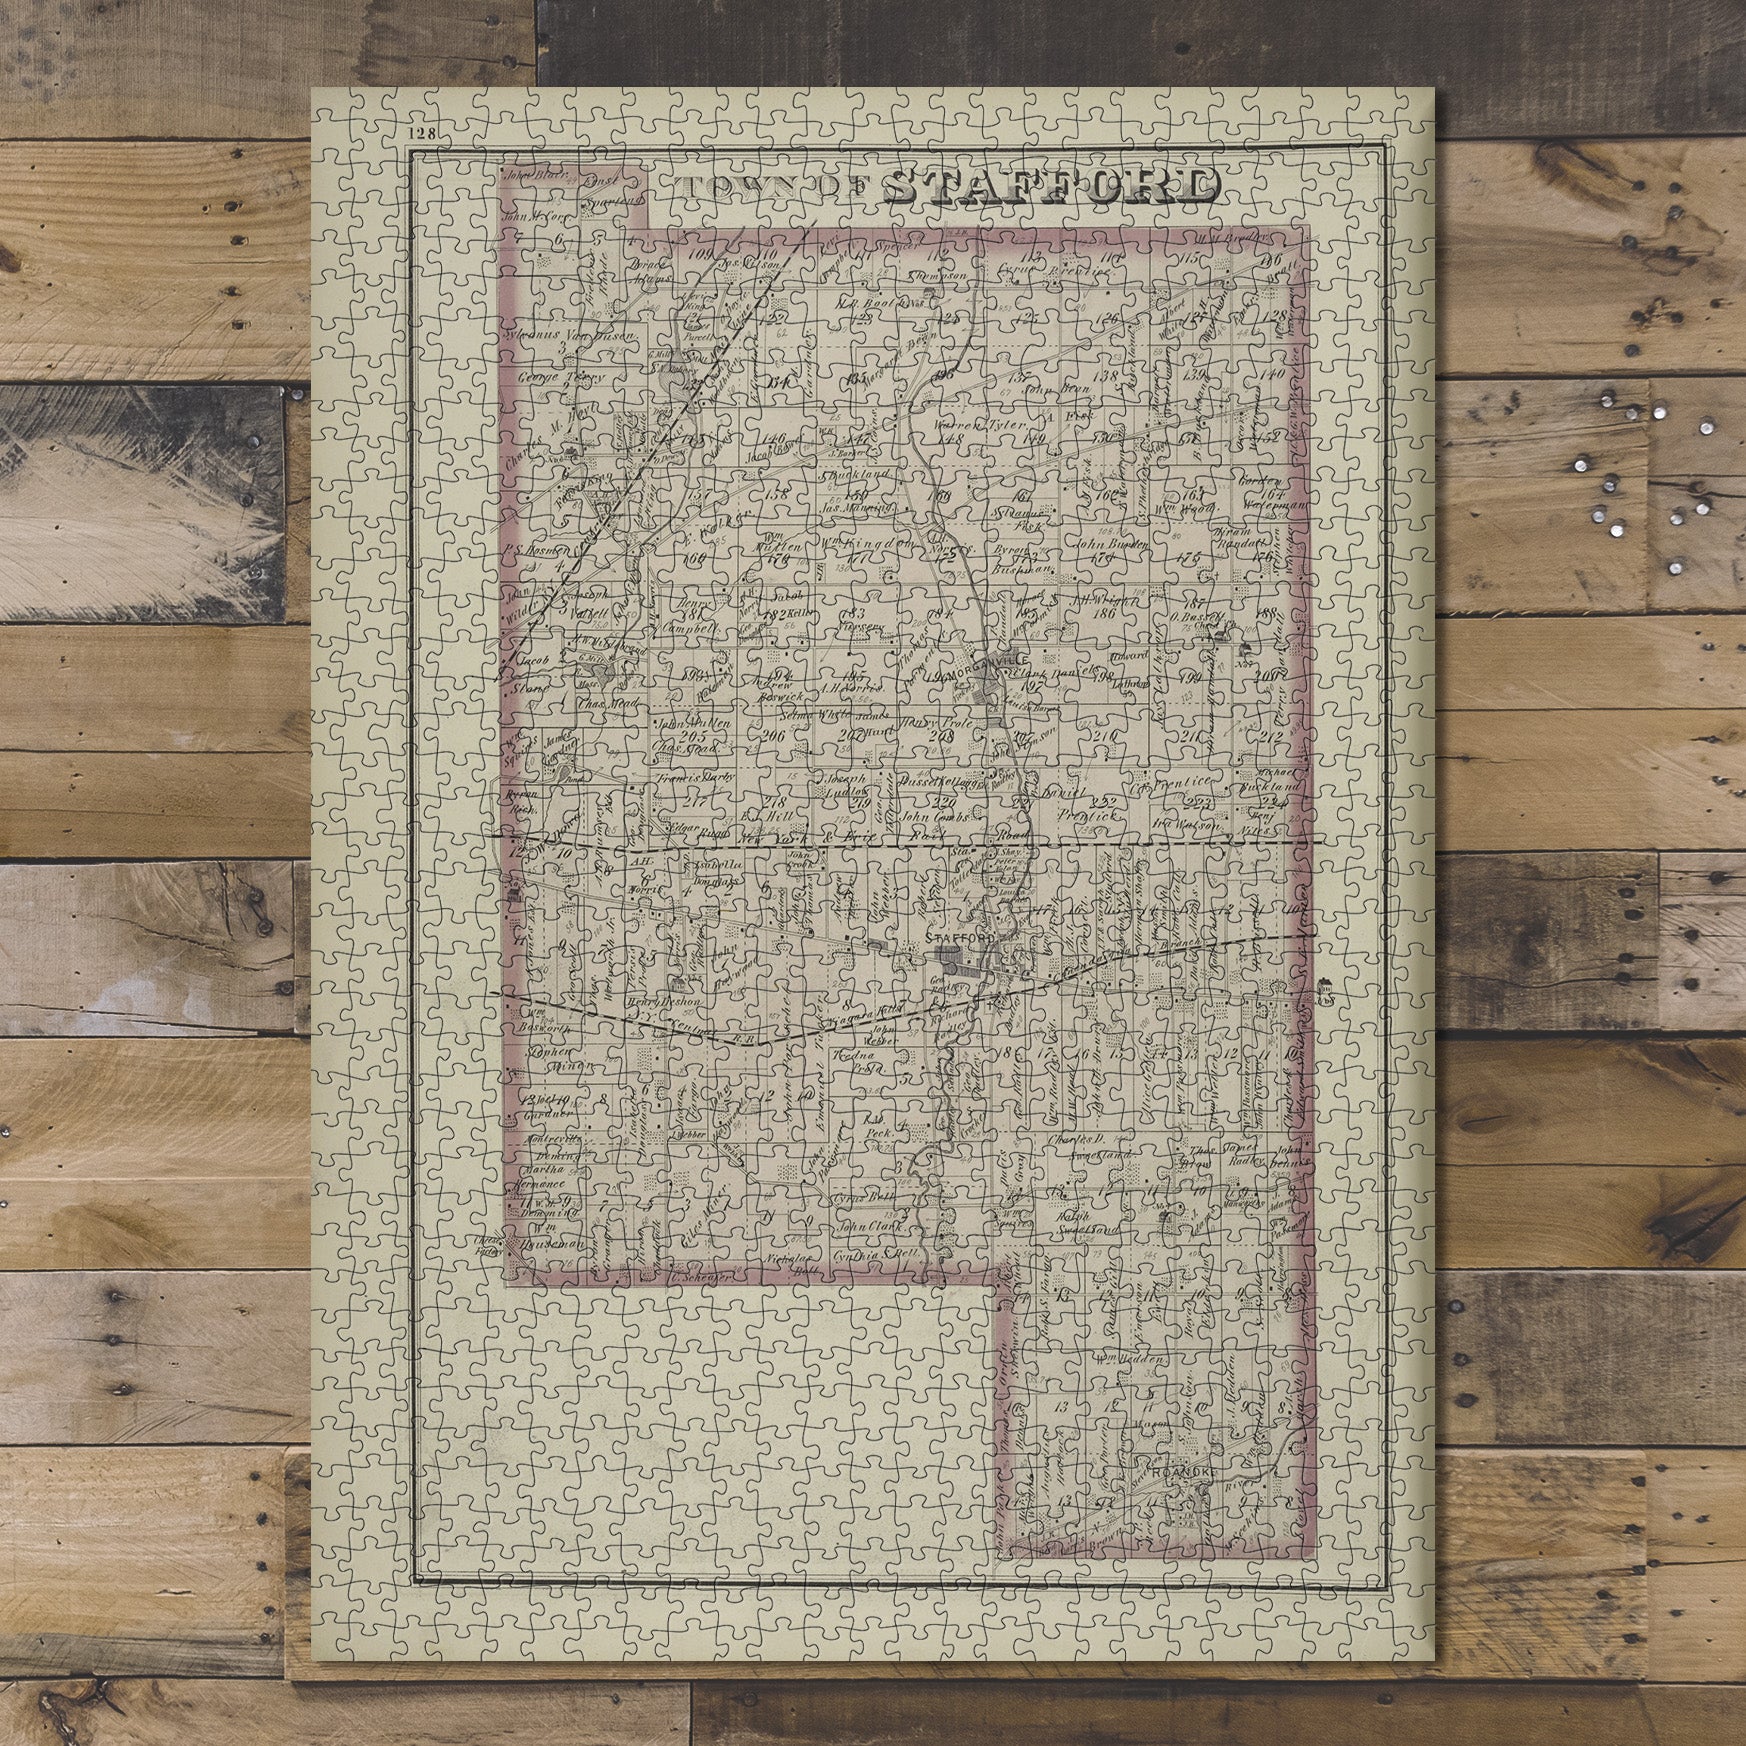 1000 Piece Jigsaw Puzzle 1876 Map of Philadelphia Town of Stafford Townshi Everts